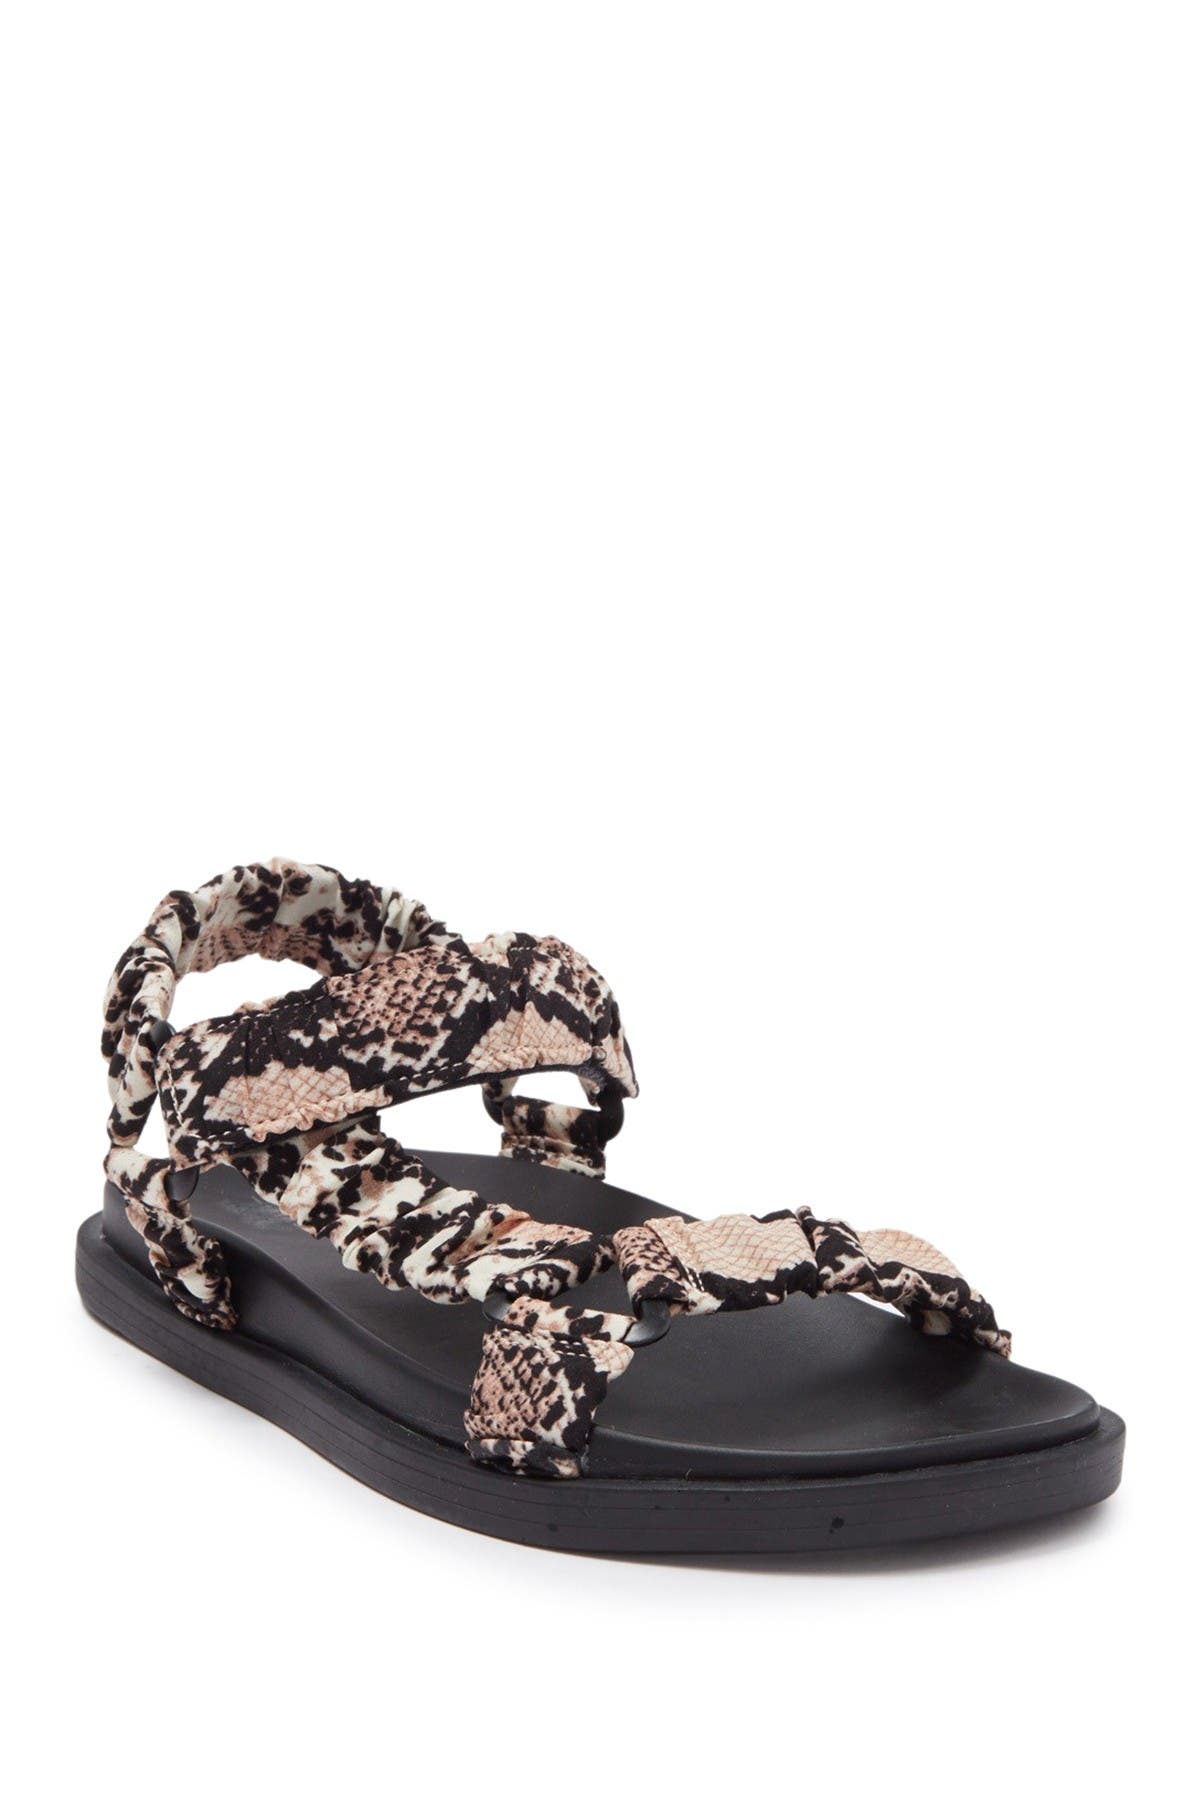 14th & Union Kylie Sandal In Beige Natural Snake